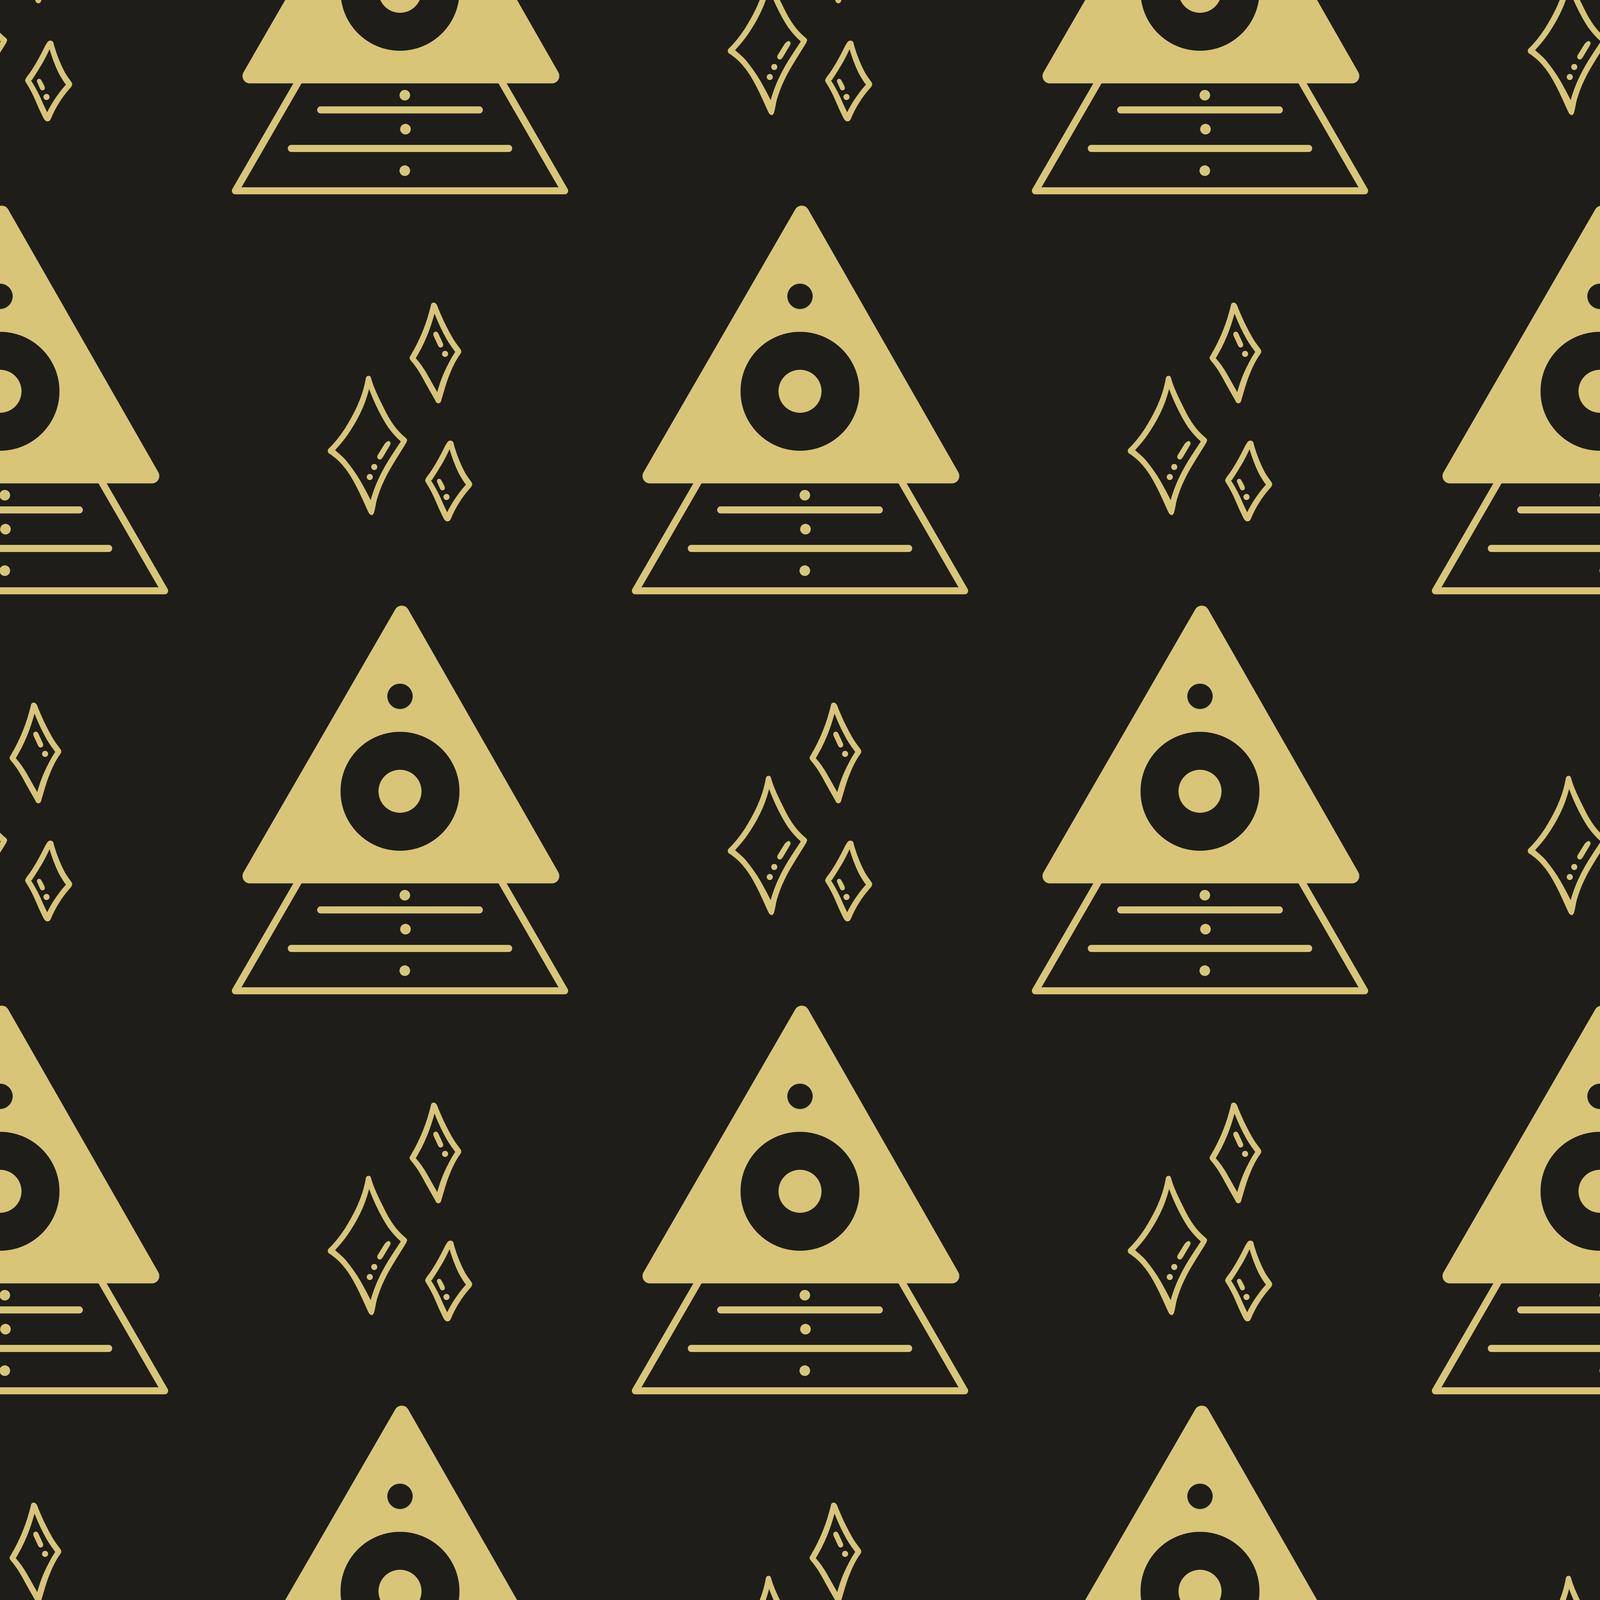 Black background with golden magic symbols seamless vector. Witchcraft print for textiles, packaging and design. Template with triangular geometric abstract elements illustration